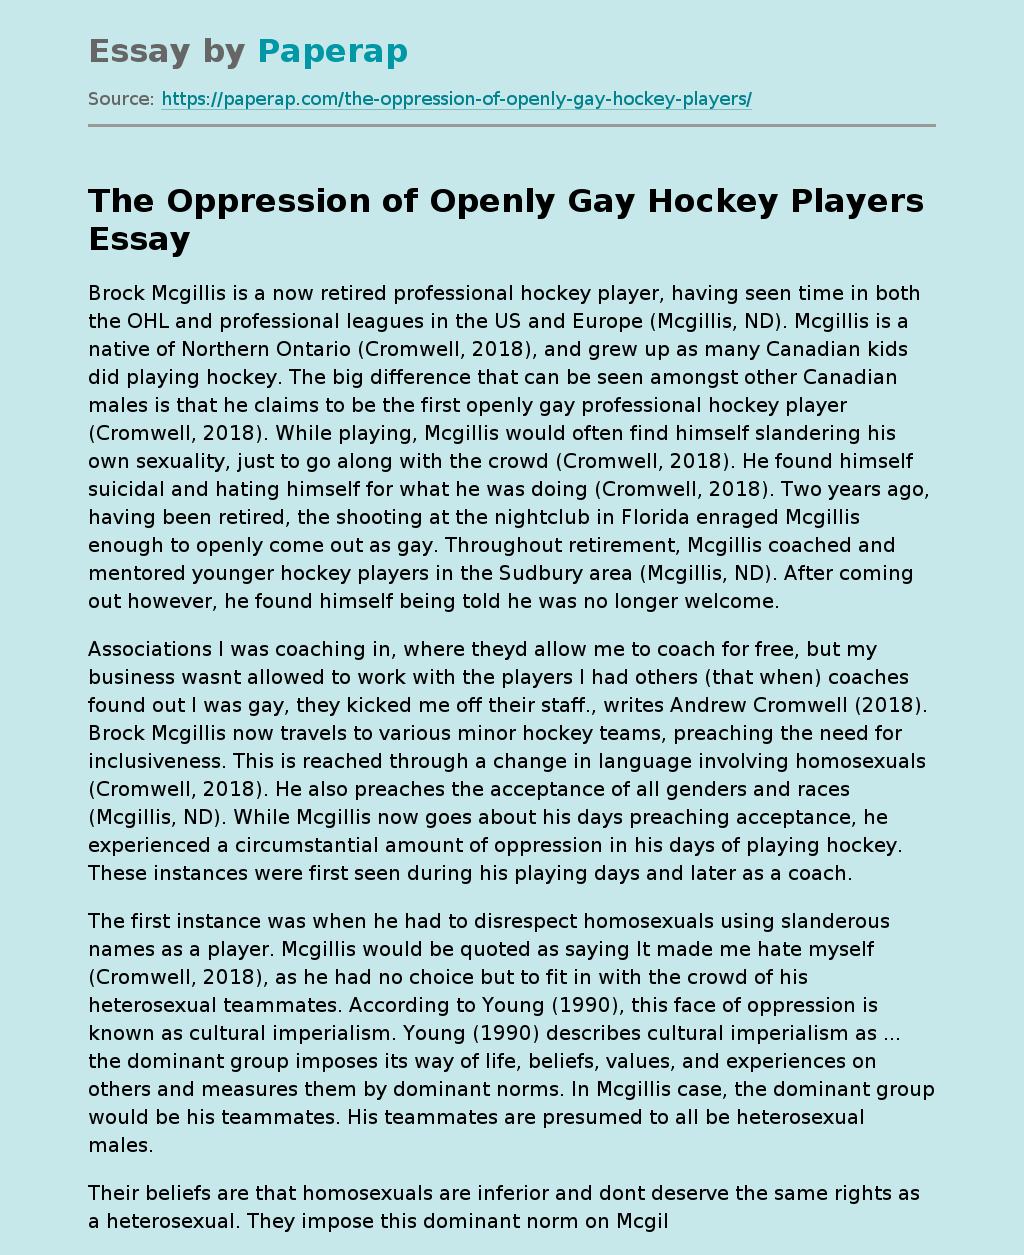 The Oppression of Openly Gay Hockey Players